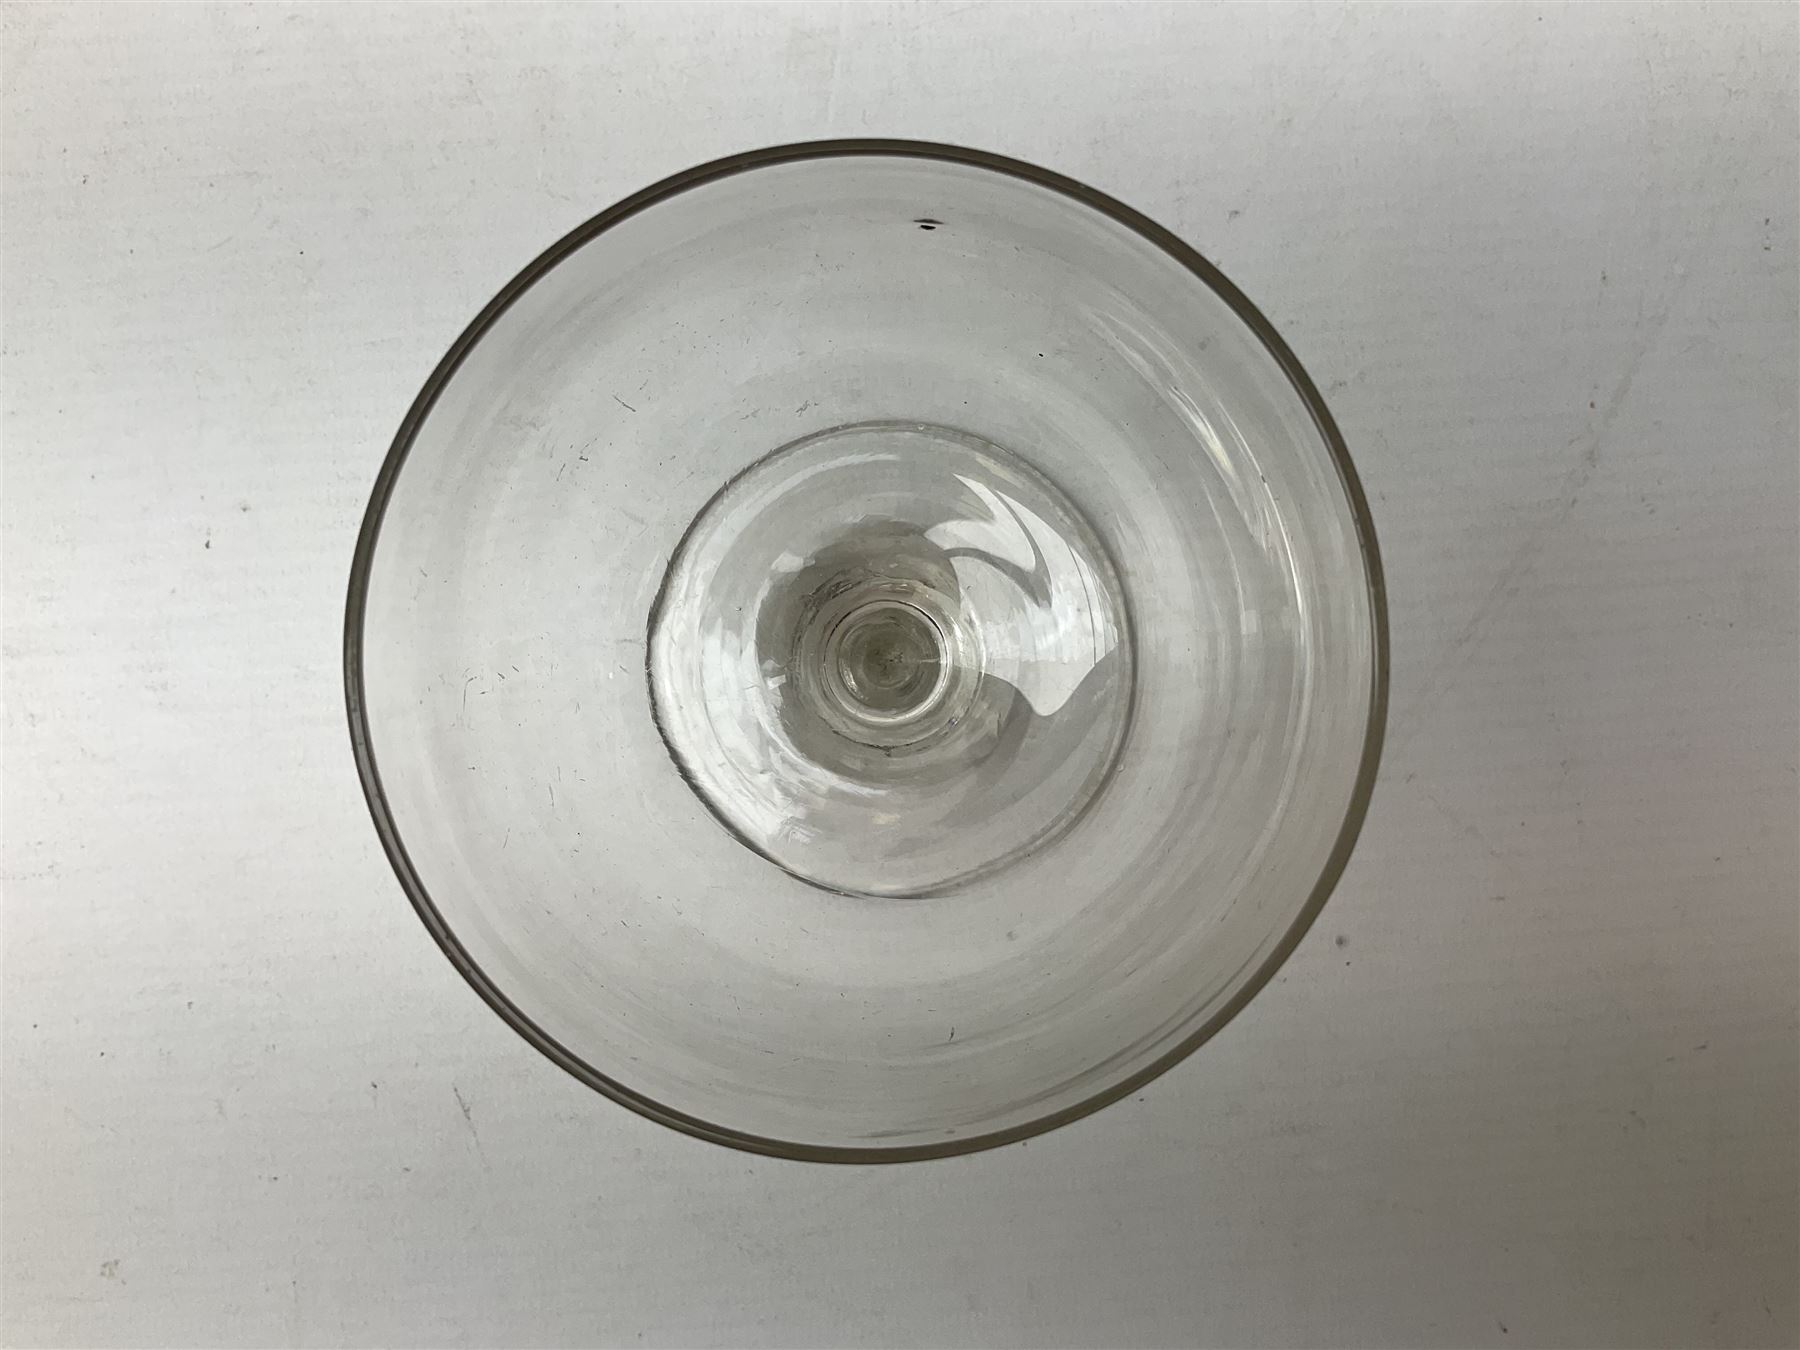 Late 18th/early 19th century drinking glass with rummer type bowl - Bild 2 aus 4